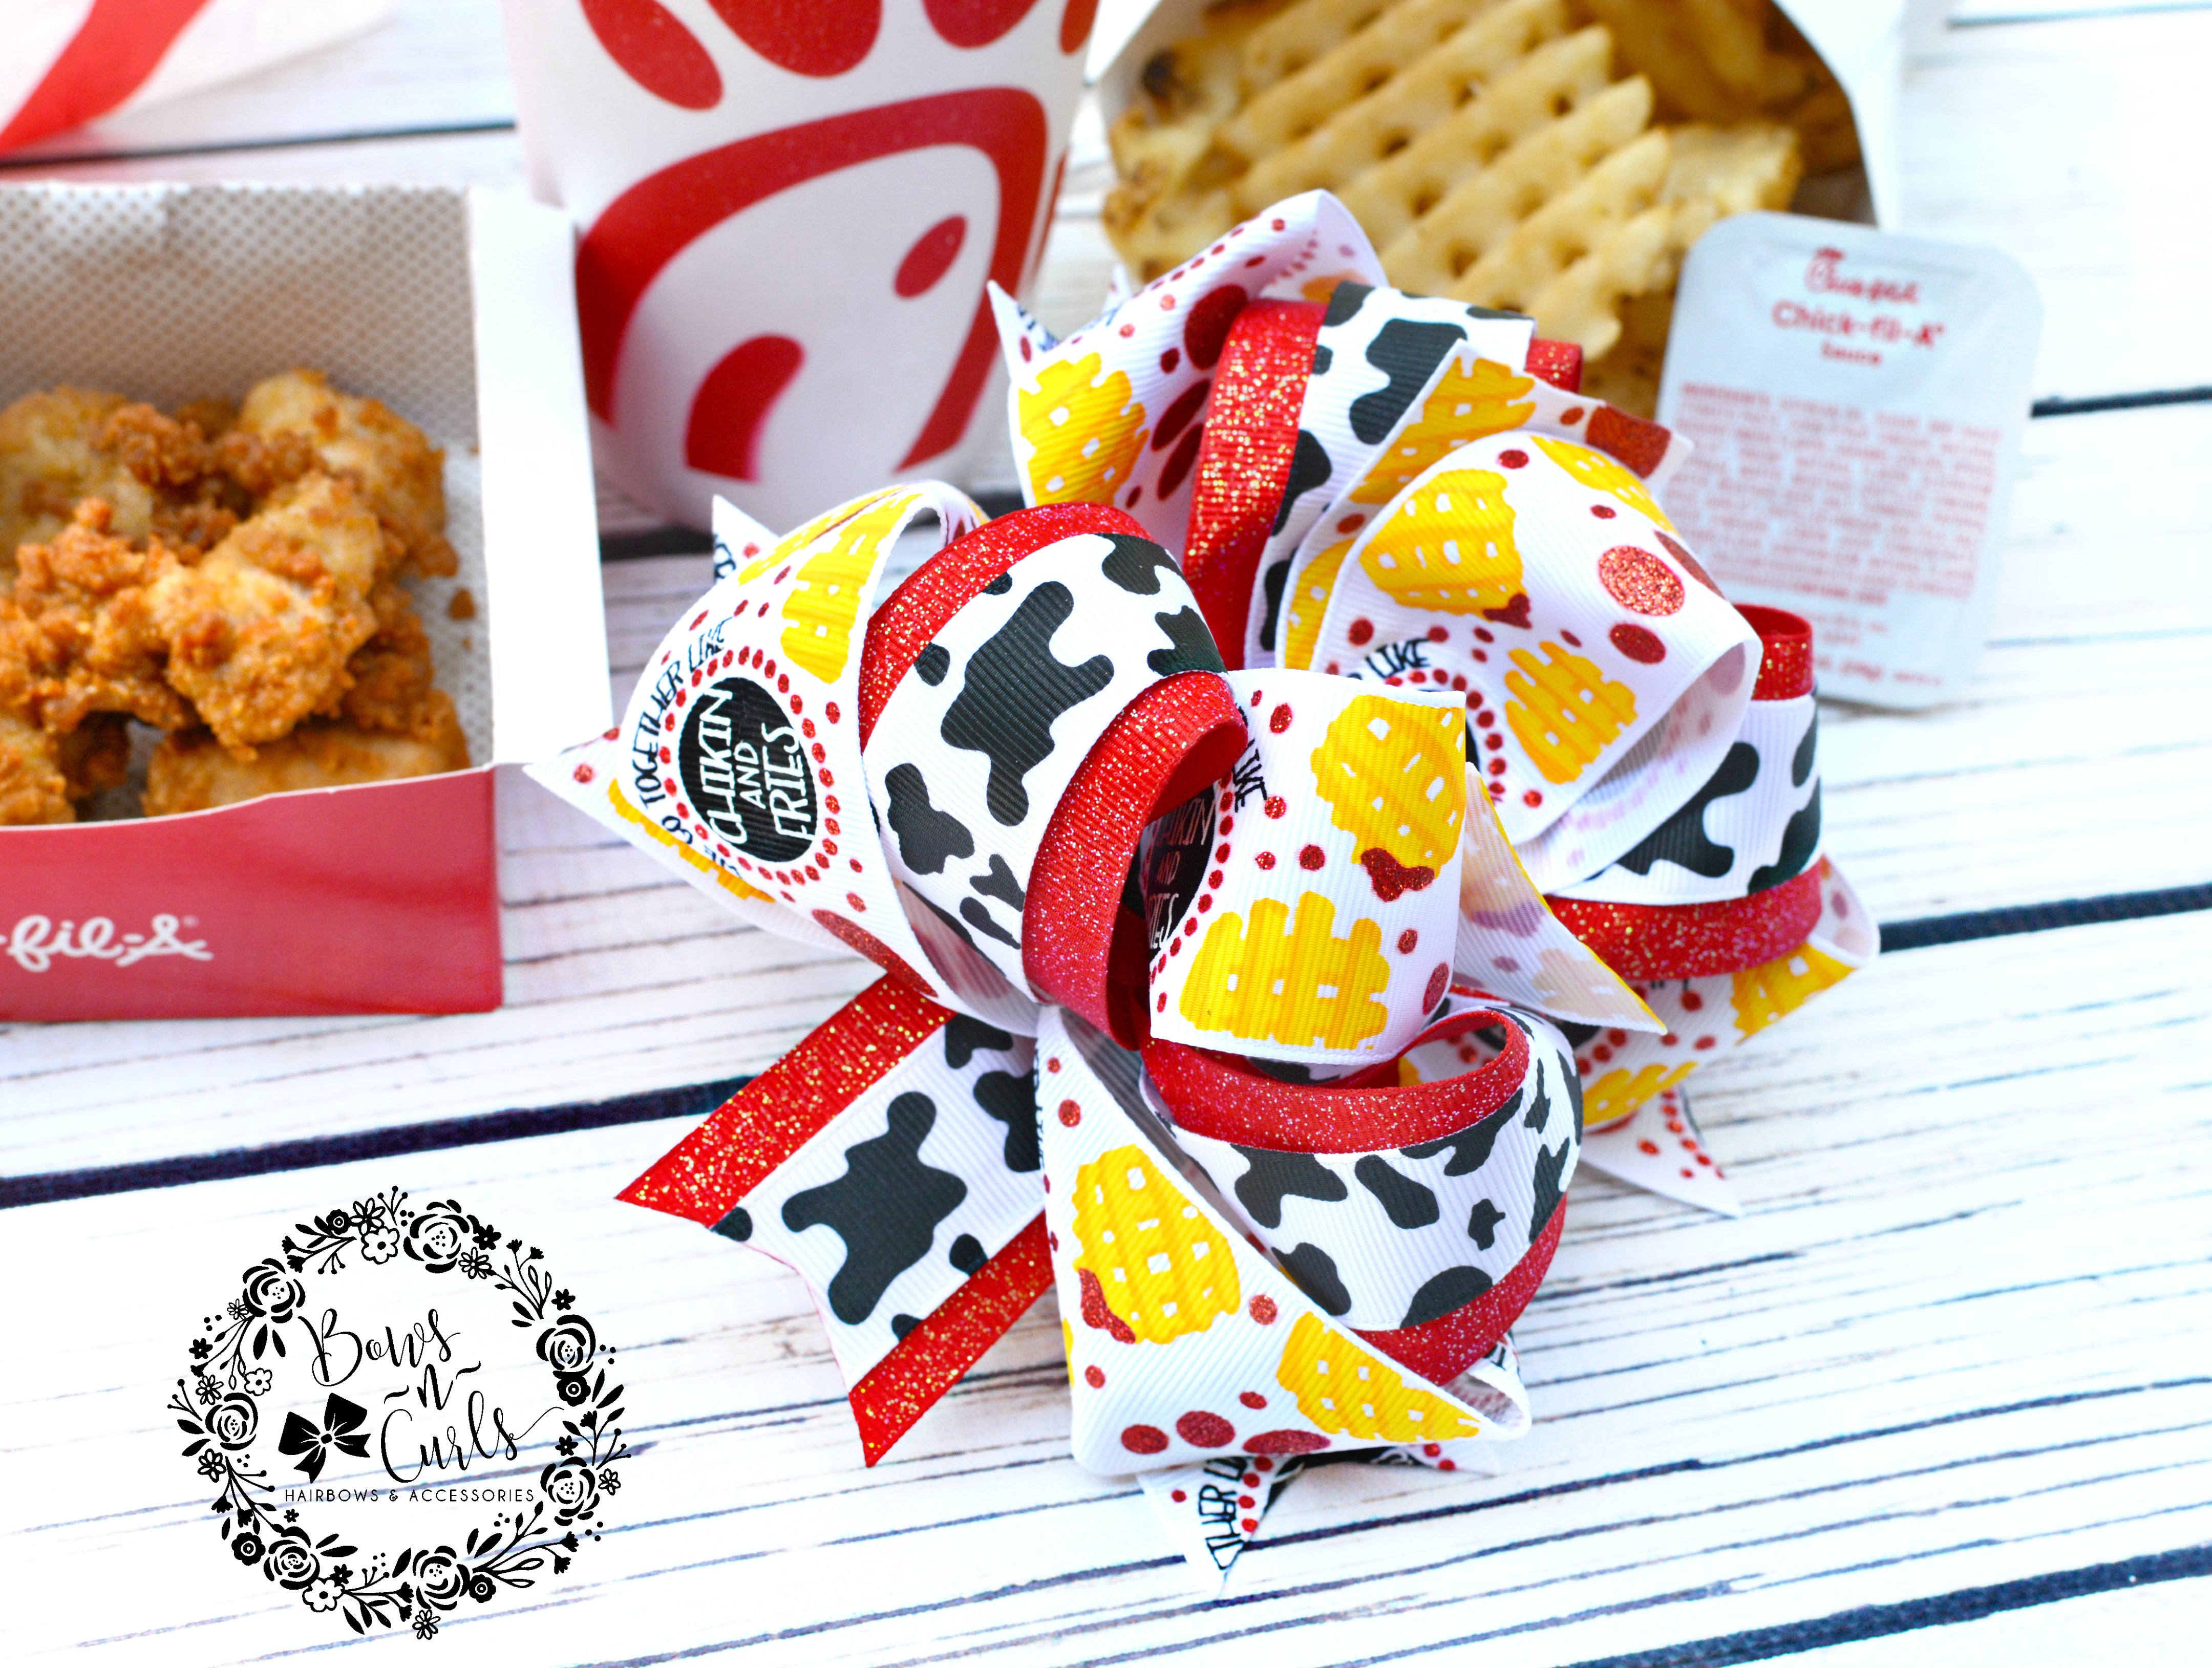 {{Chikin and Fries}}